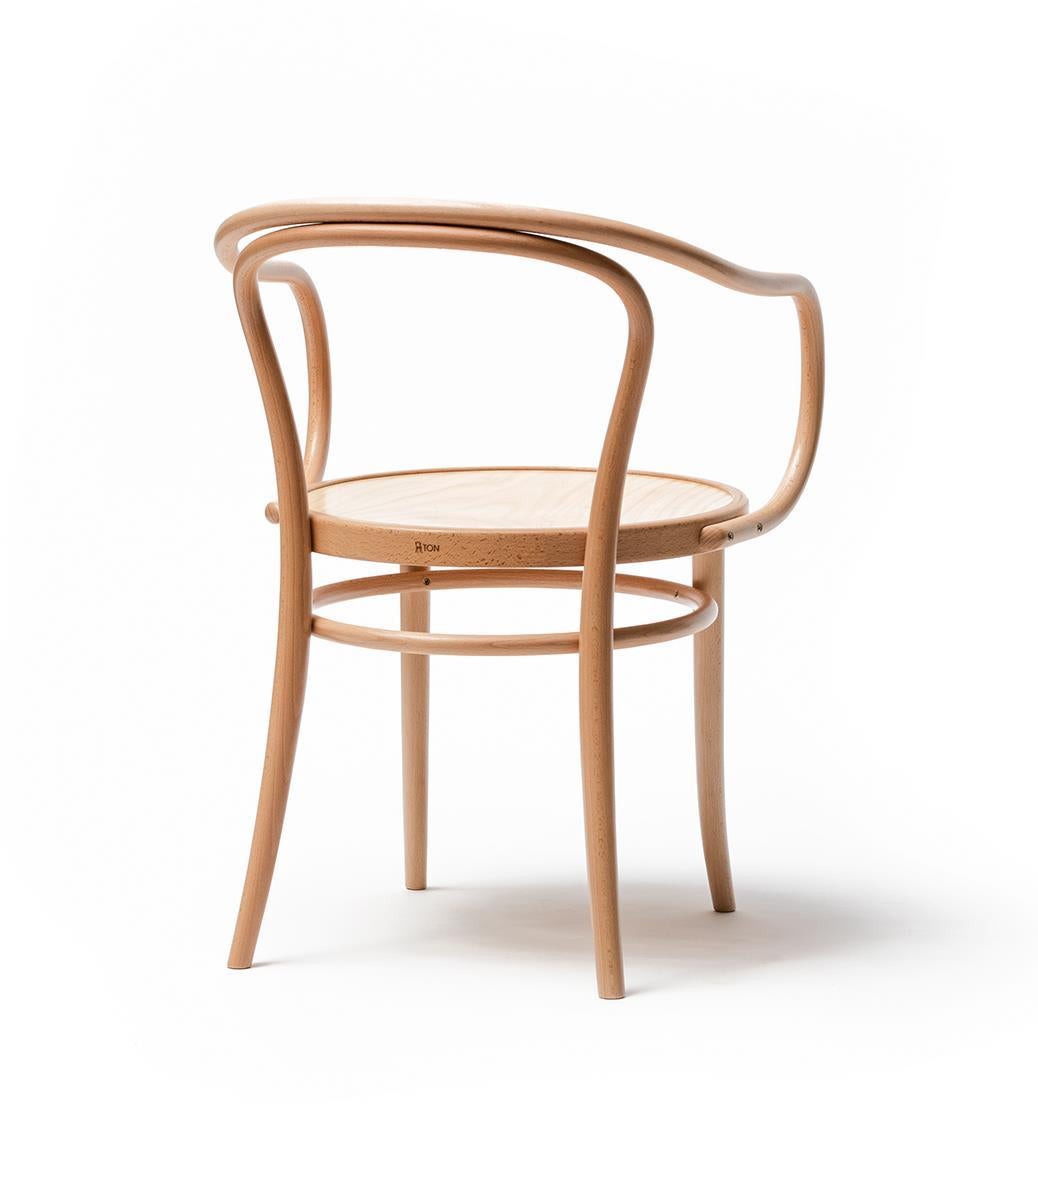 Armchair No. 30
Iconic bistro chair conceived by Michael Thonet in 1869, now produced in the same manufacture in Czech Republic by TON. 

Wood: solid beech 
Finish: natural light 
Seat: plain wood 

--
Chair no. 30 by TON is one of the oldest, most